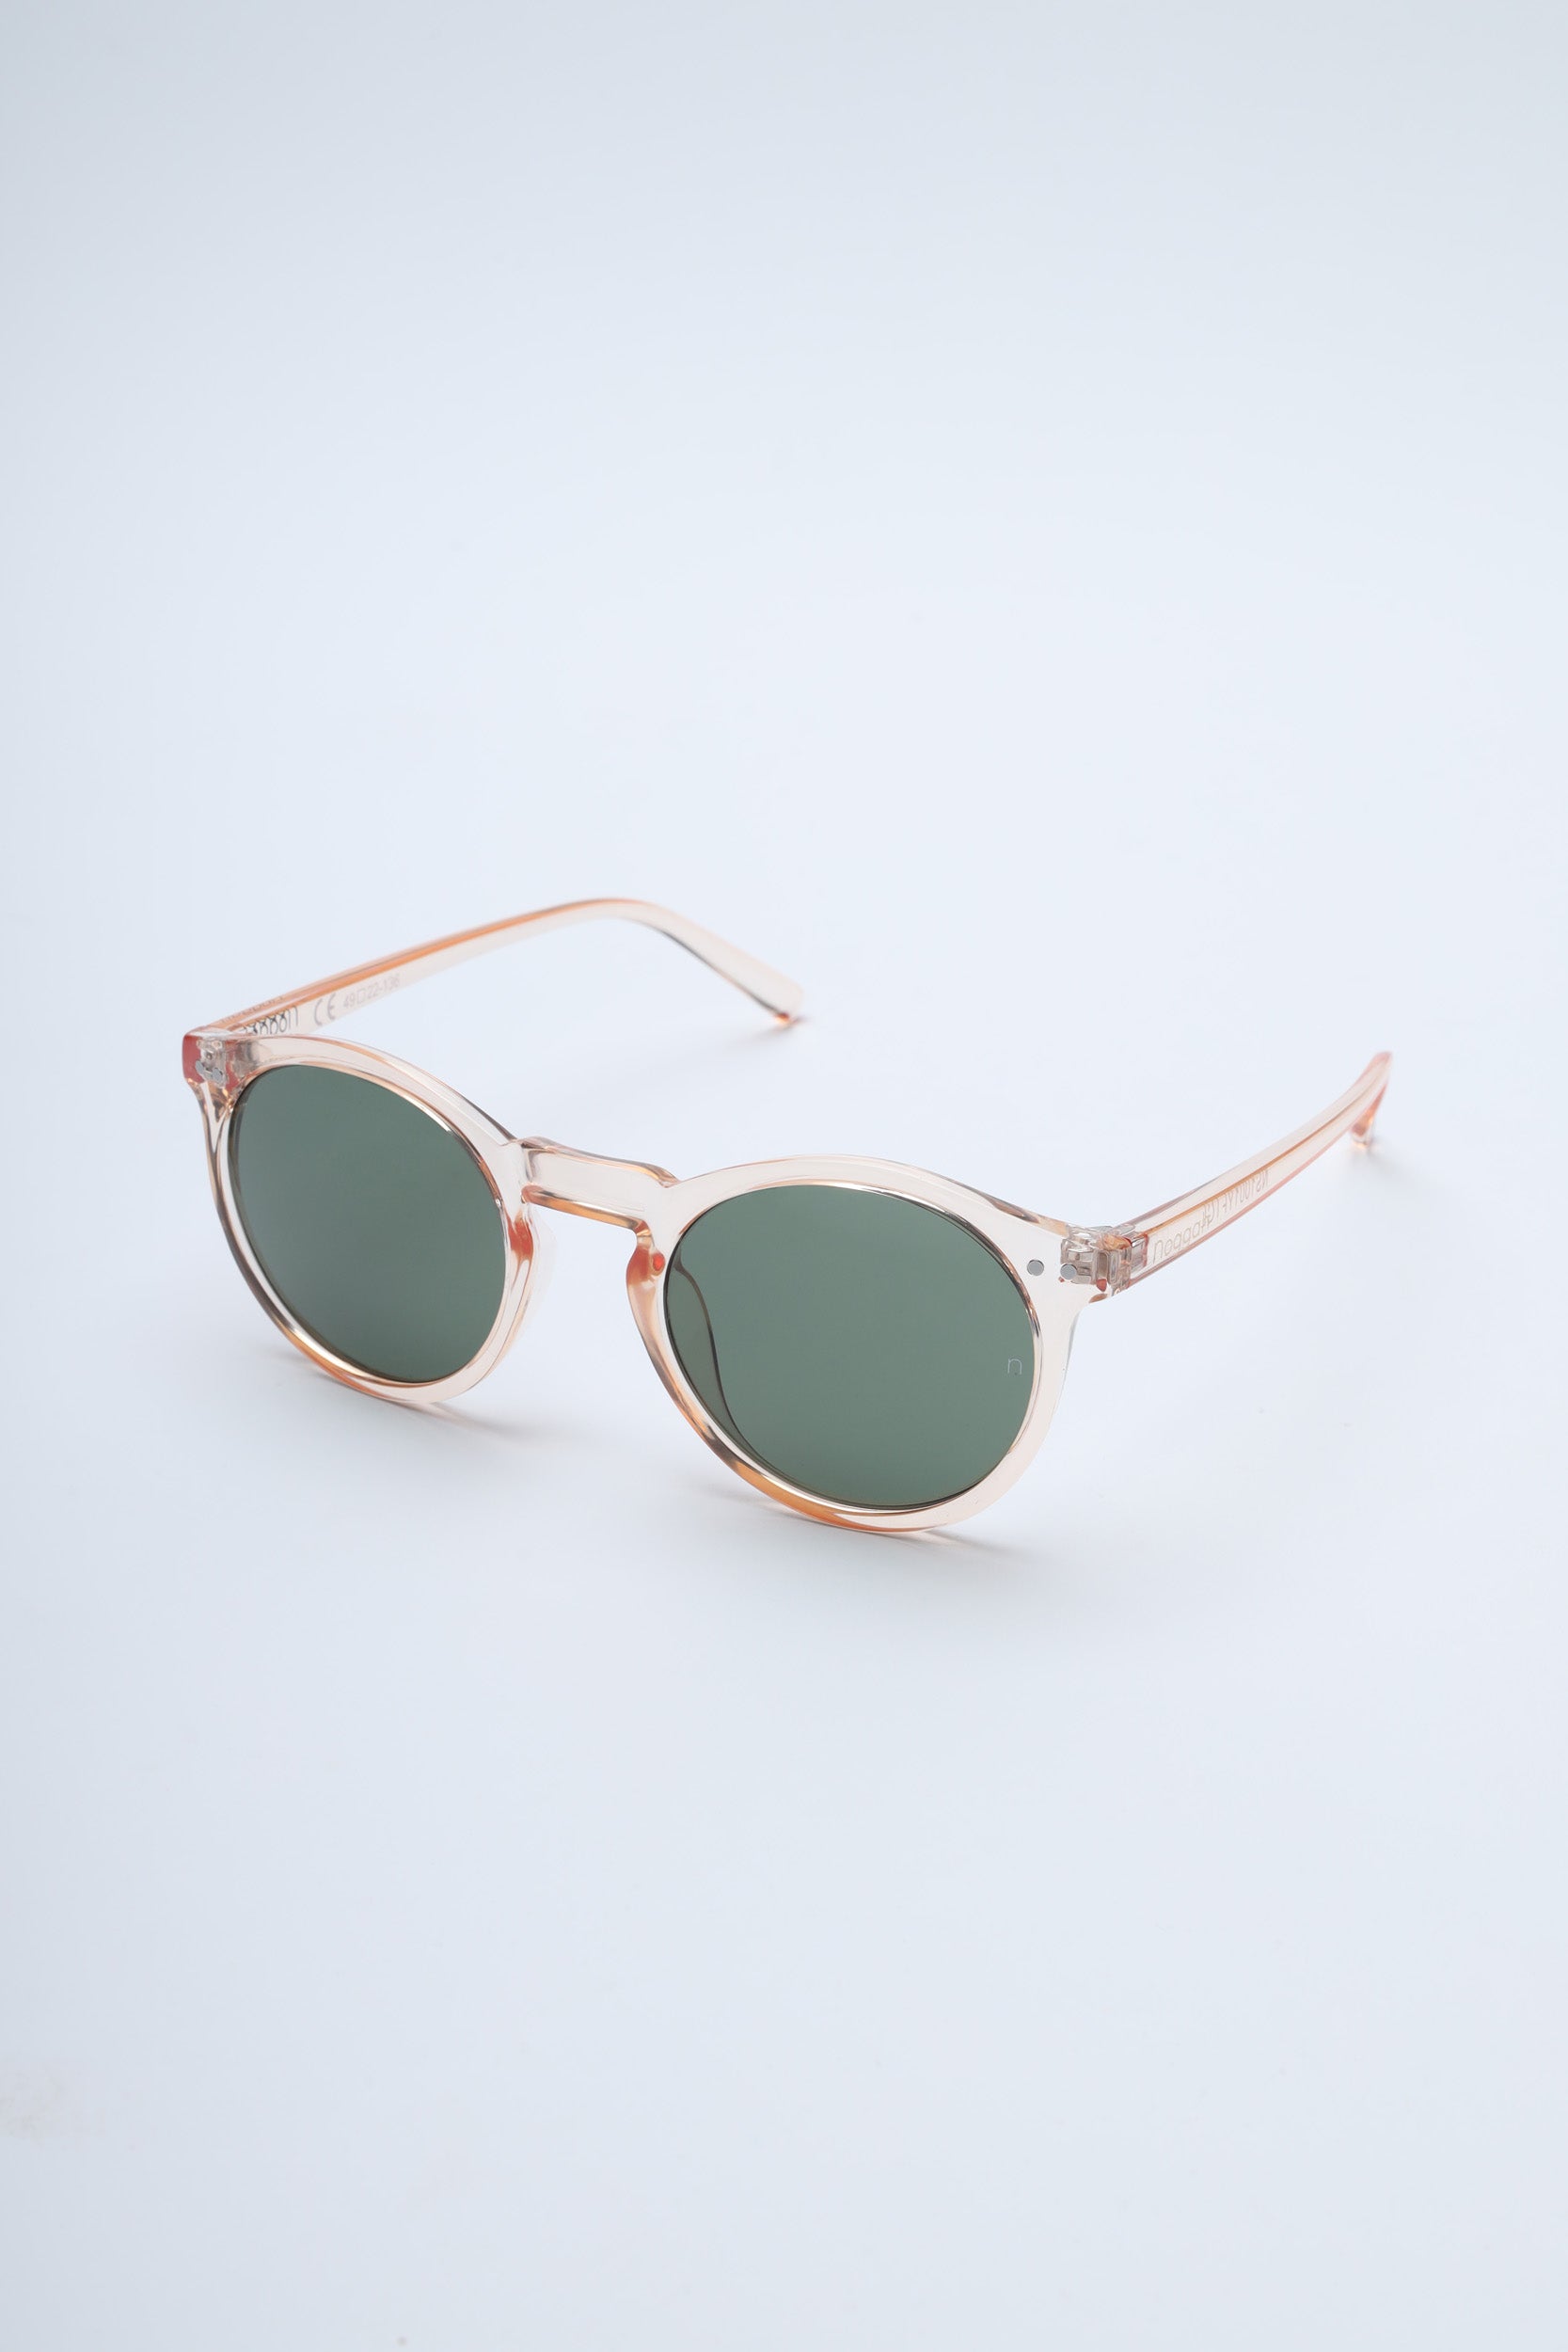 Ray Ban Sunglasses - Shop Iconic Eyewear Online at Best Price | Myntra